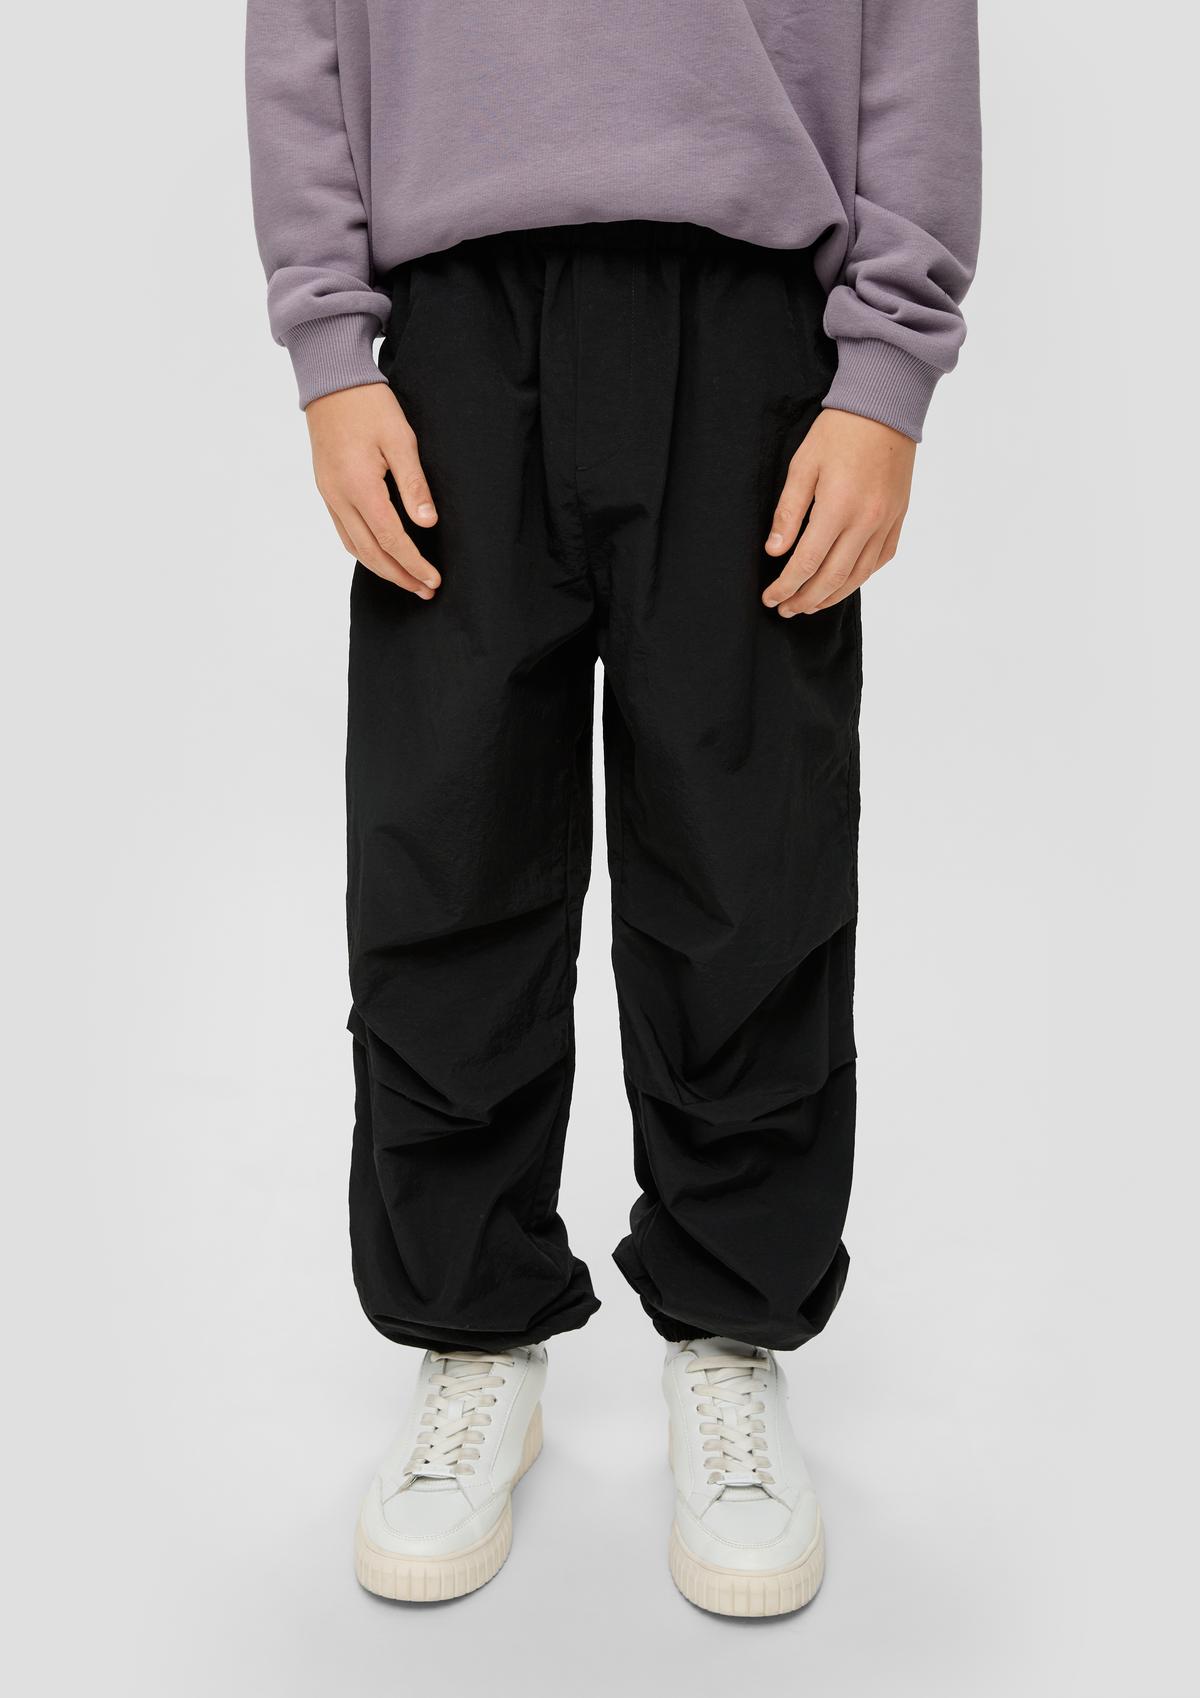 Parachute trousers with a straight leg